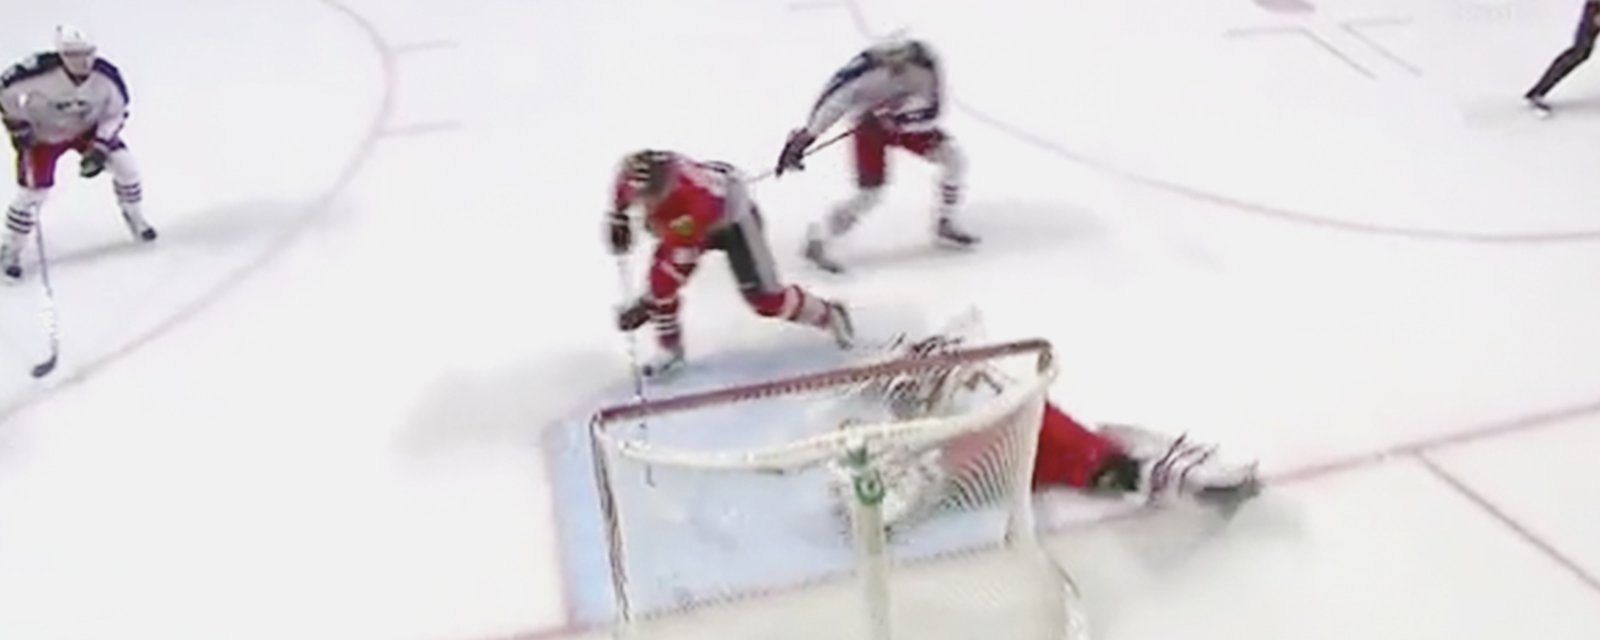 MUST SEE: Hossa's smooth finish in front